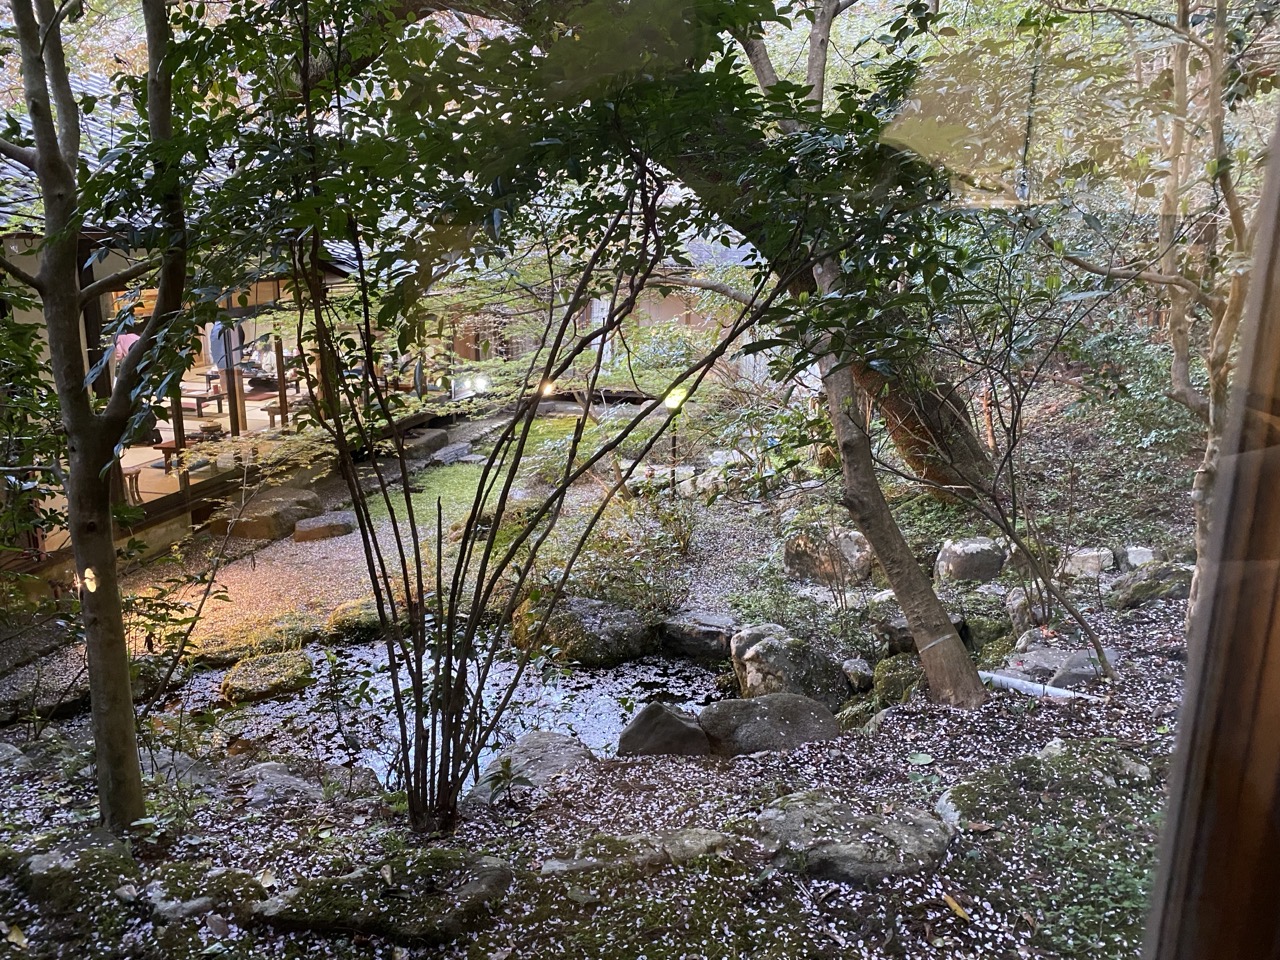 The view from our room in the ryokan. It’s a woodland with a little pond